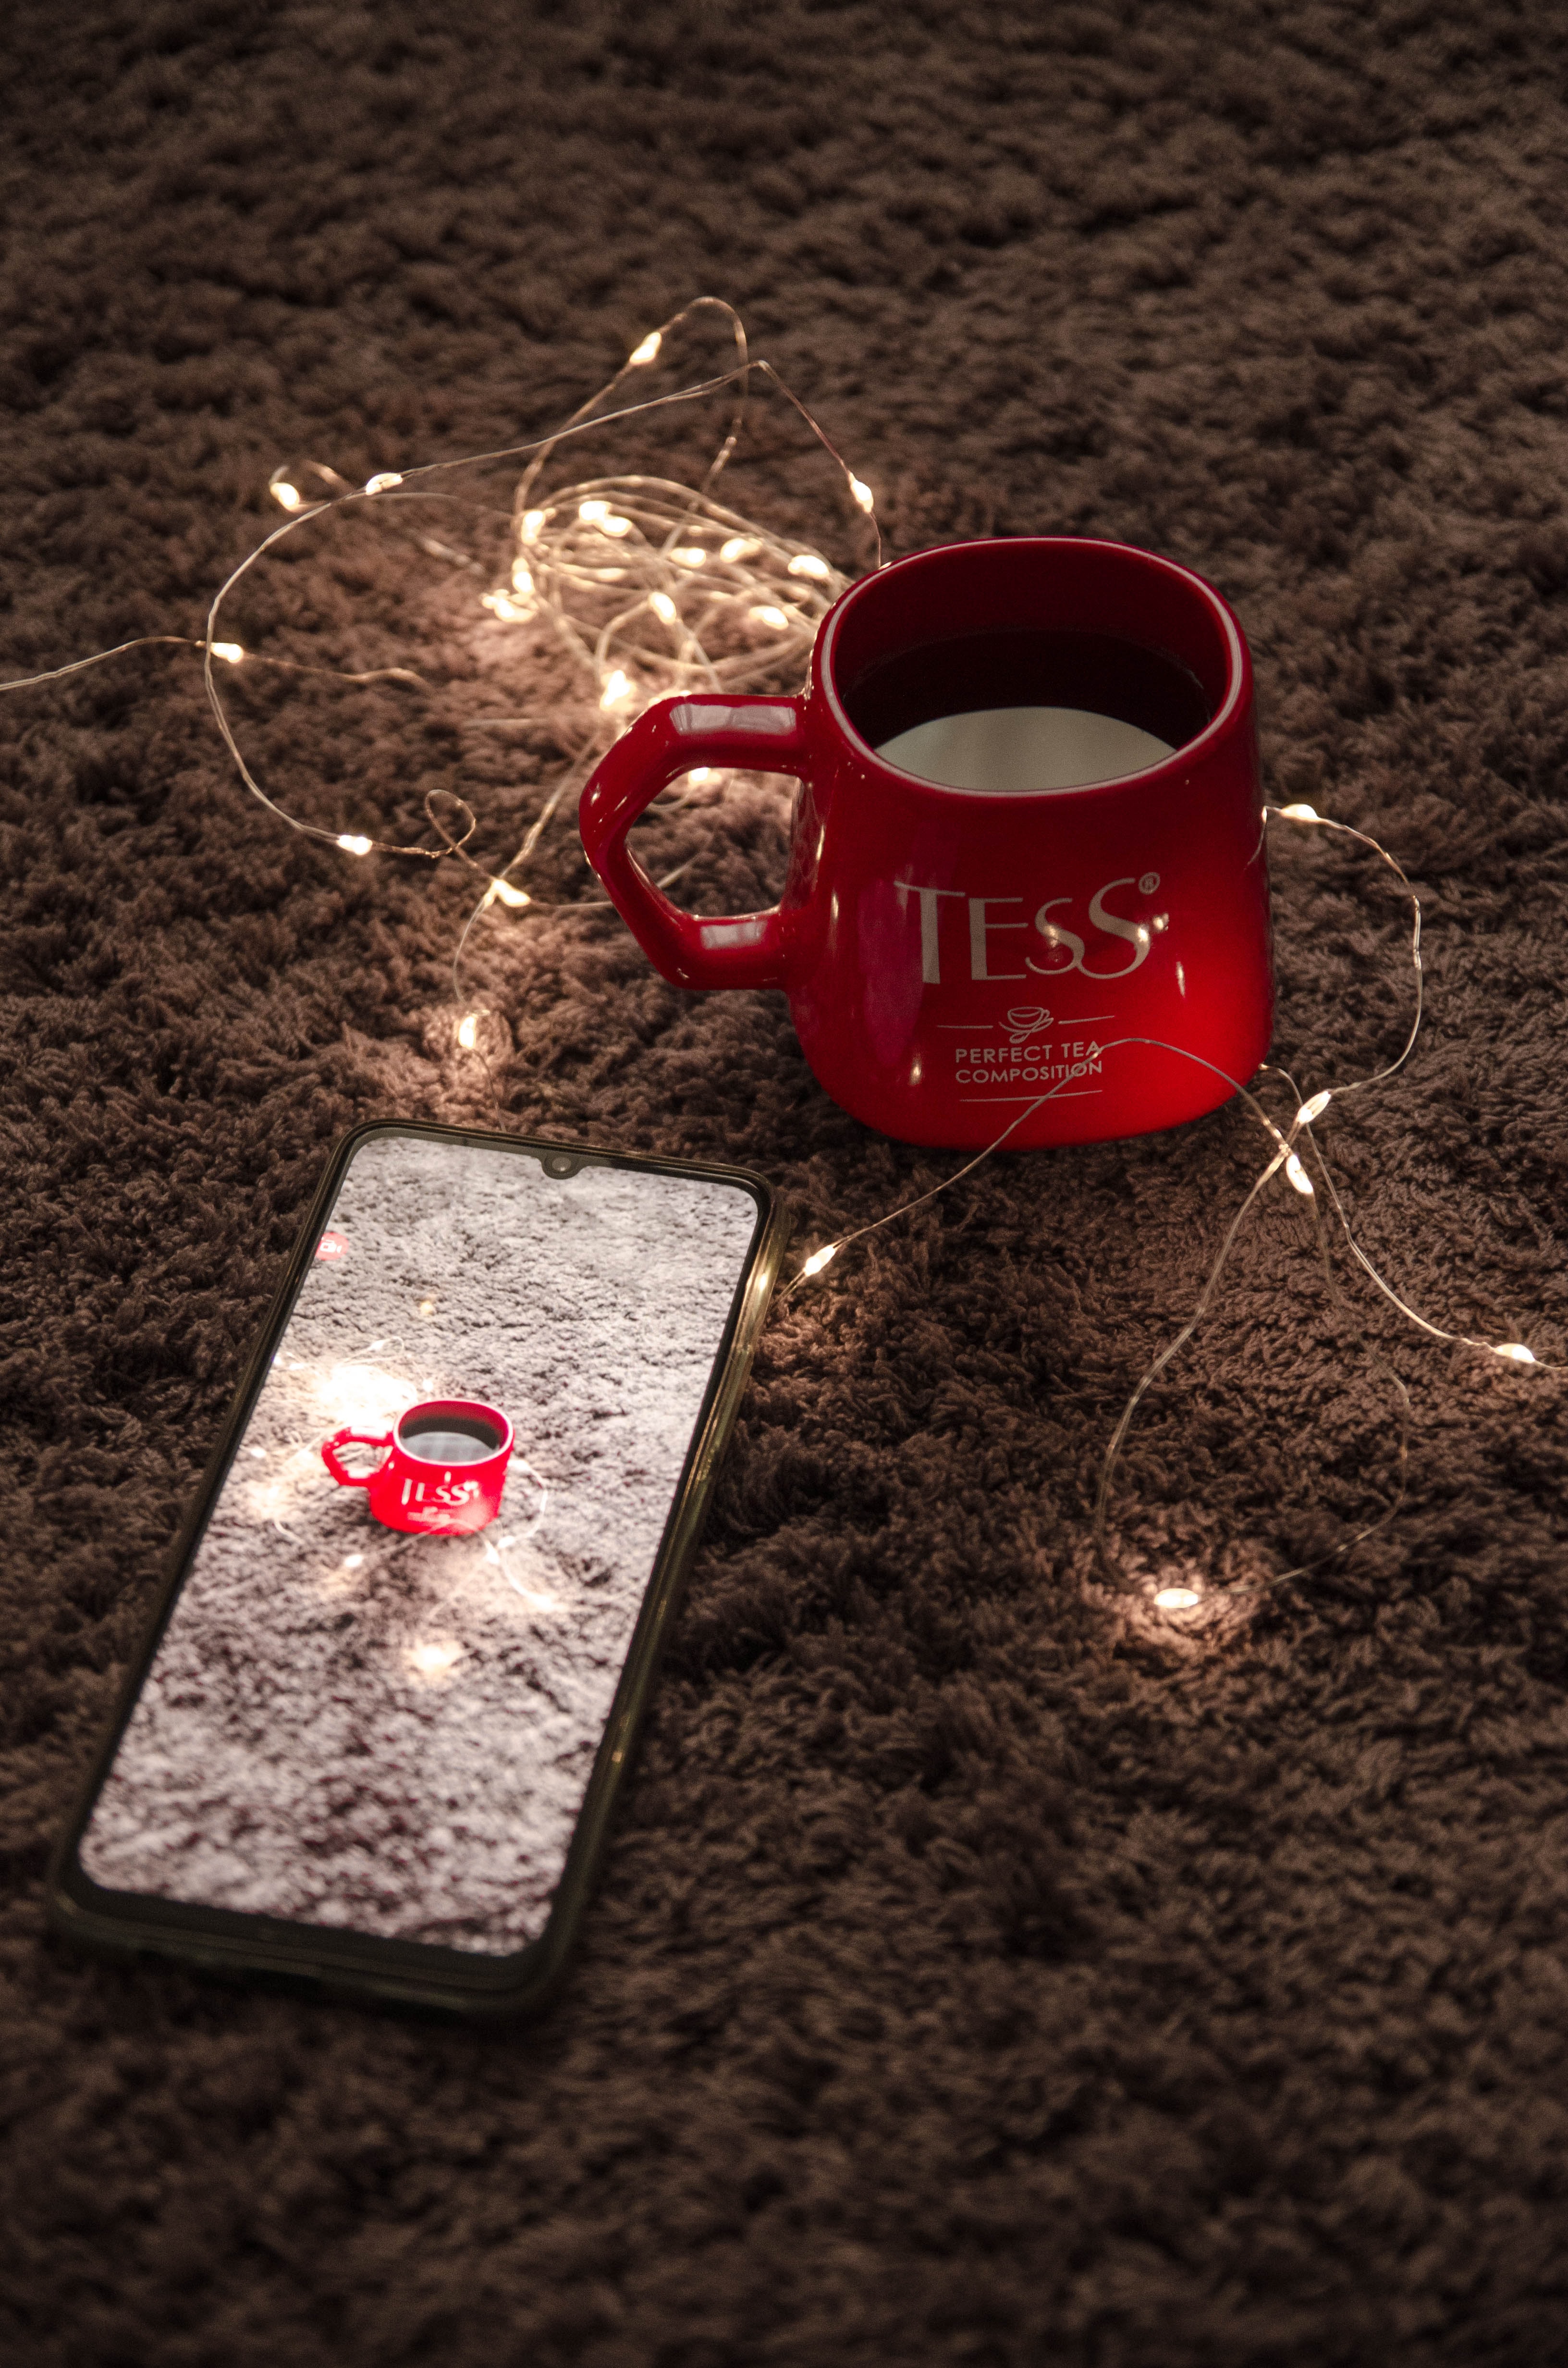 cup, mug, garland, miscellaneous, telephone, miscellanea, red phone background